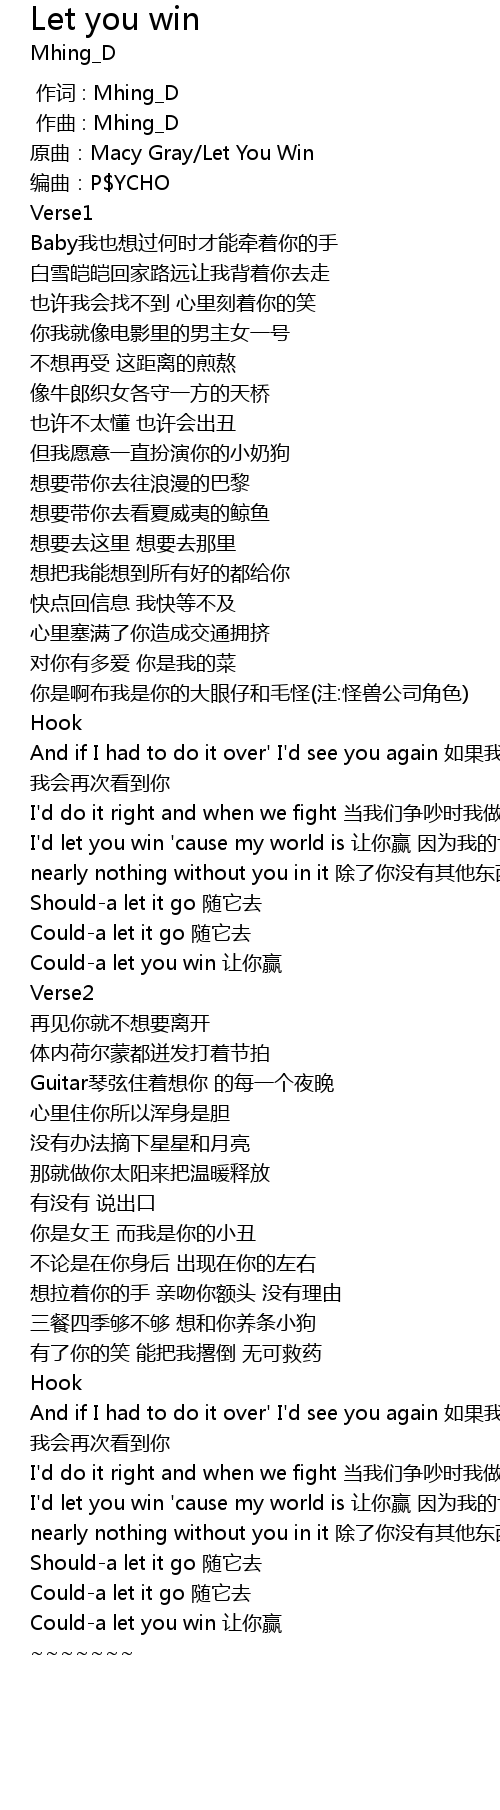 Let you win 歌词